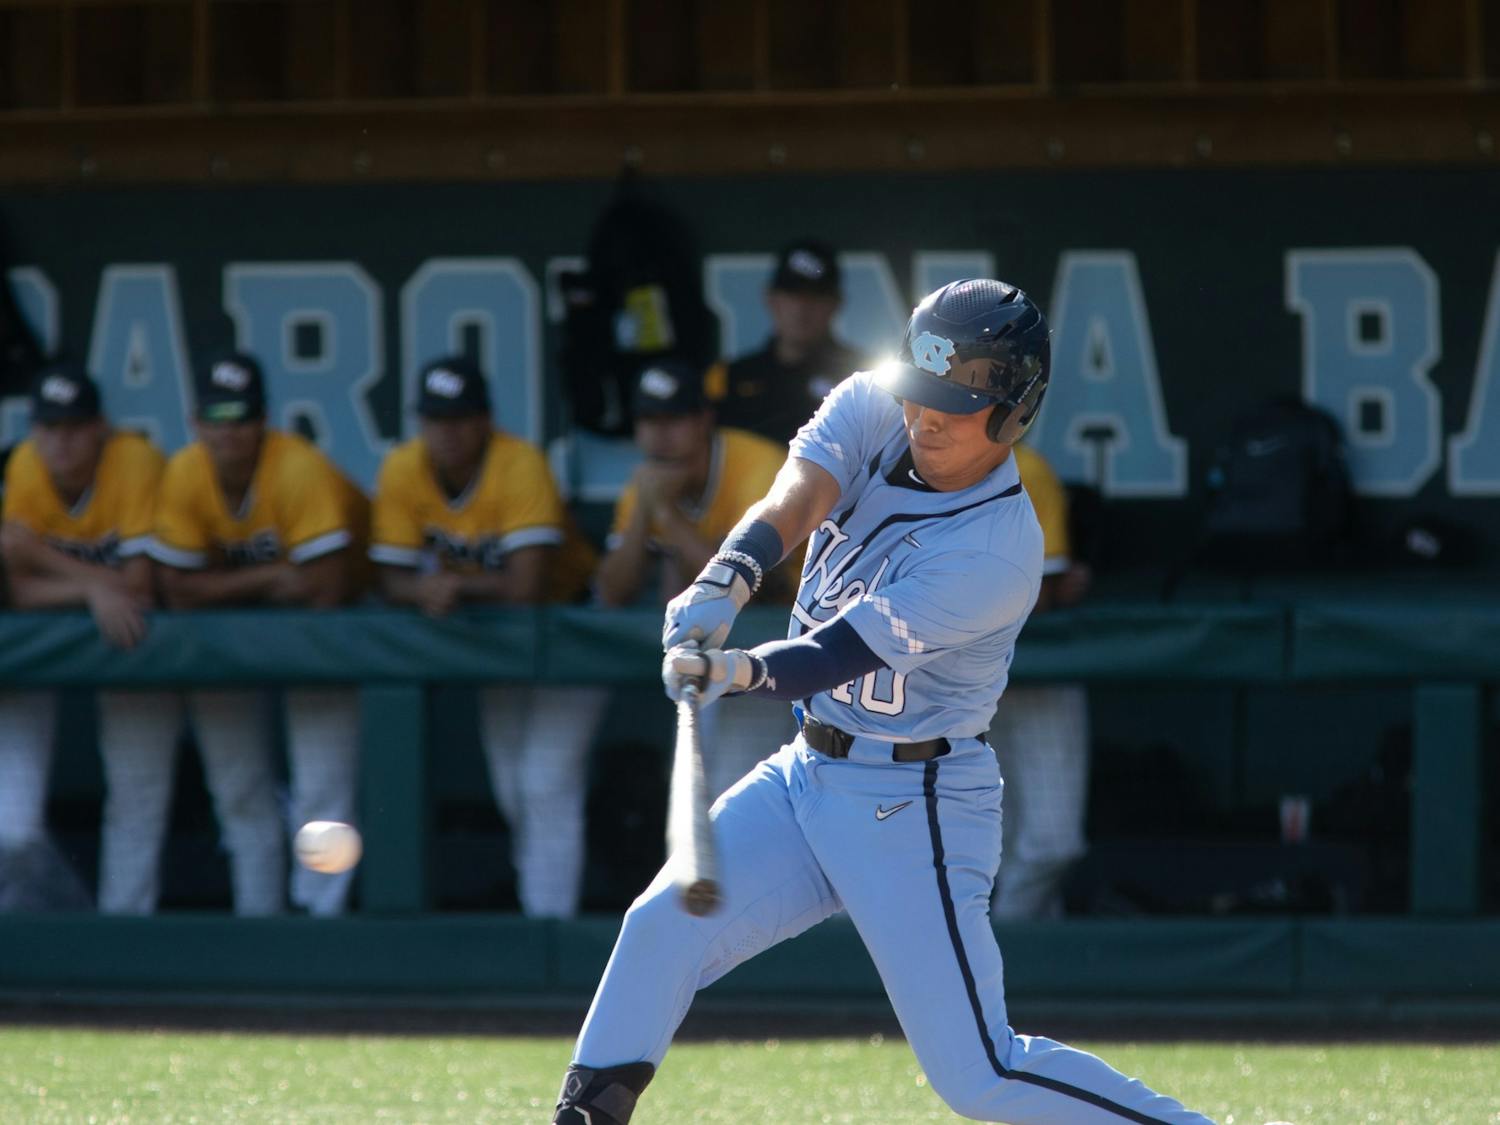 Junior outfielder Angel Zarate (40) connects with the ball during the first inning of UNC's NCAA Regional against VCU at Boshamer Stadium on June 6, 2022.